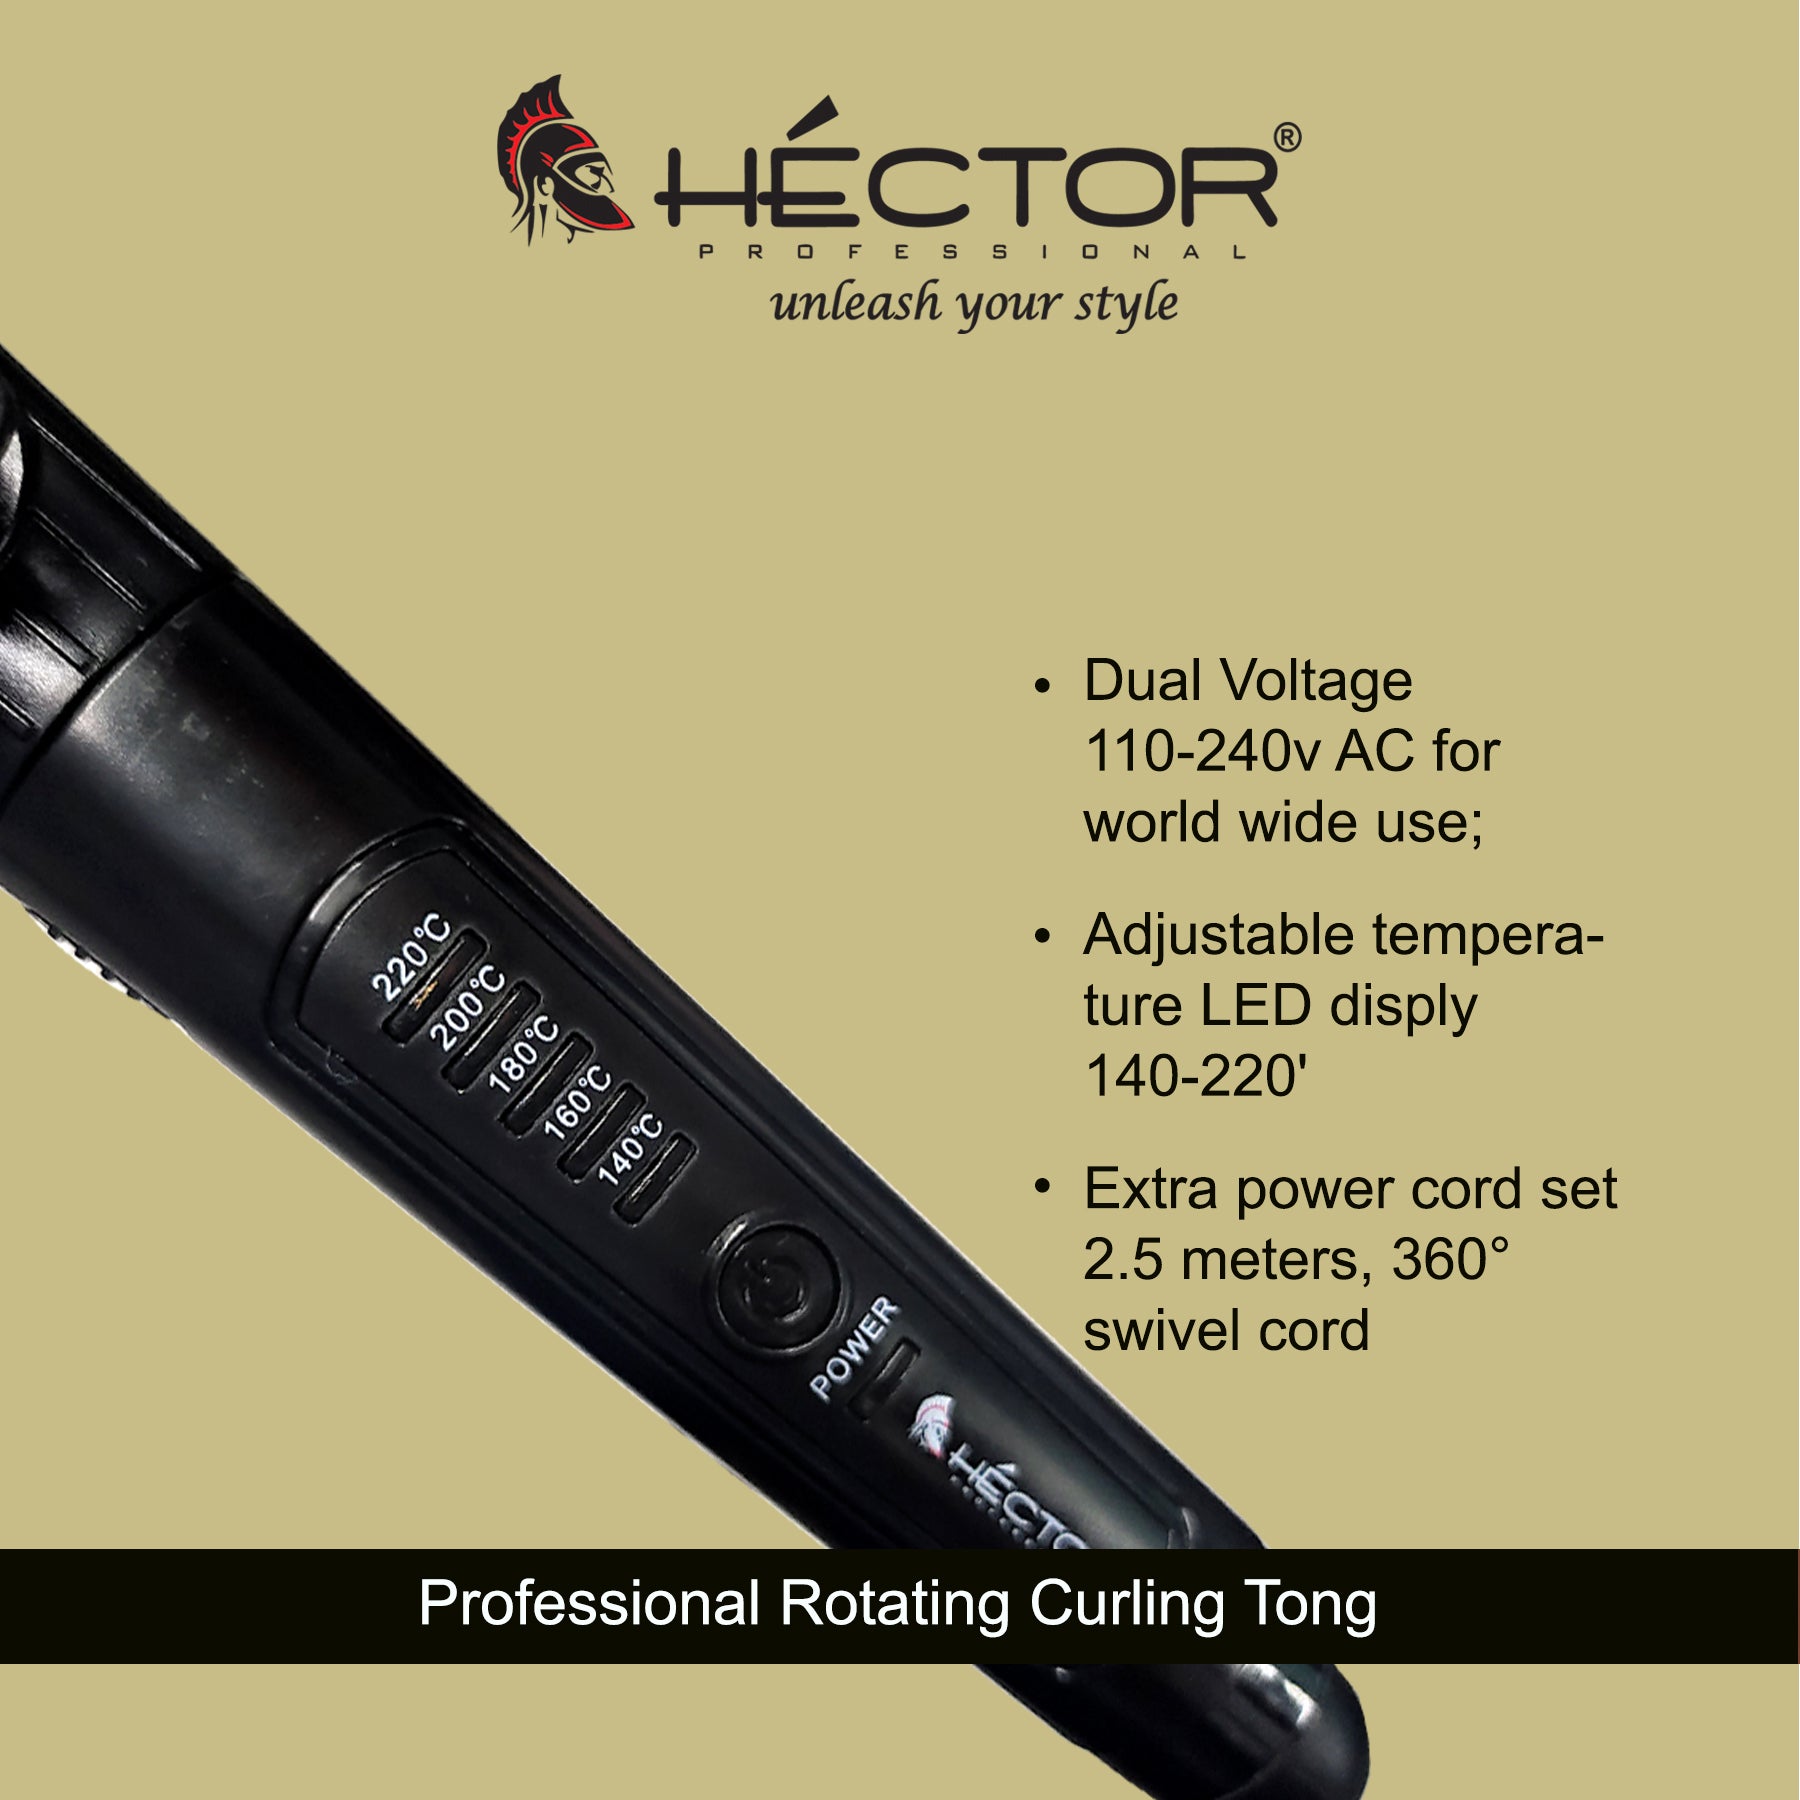 Hector Professional Rotating Hair Curler with 19MM Barrel, Rod, Titanium Coated Plates, Cool Touch Tip, Fast Heating, for Women, Long and Short Hair Curling, Styling, Black & Graceful Green